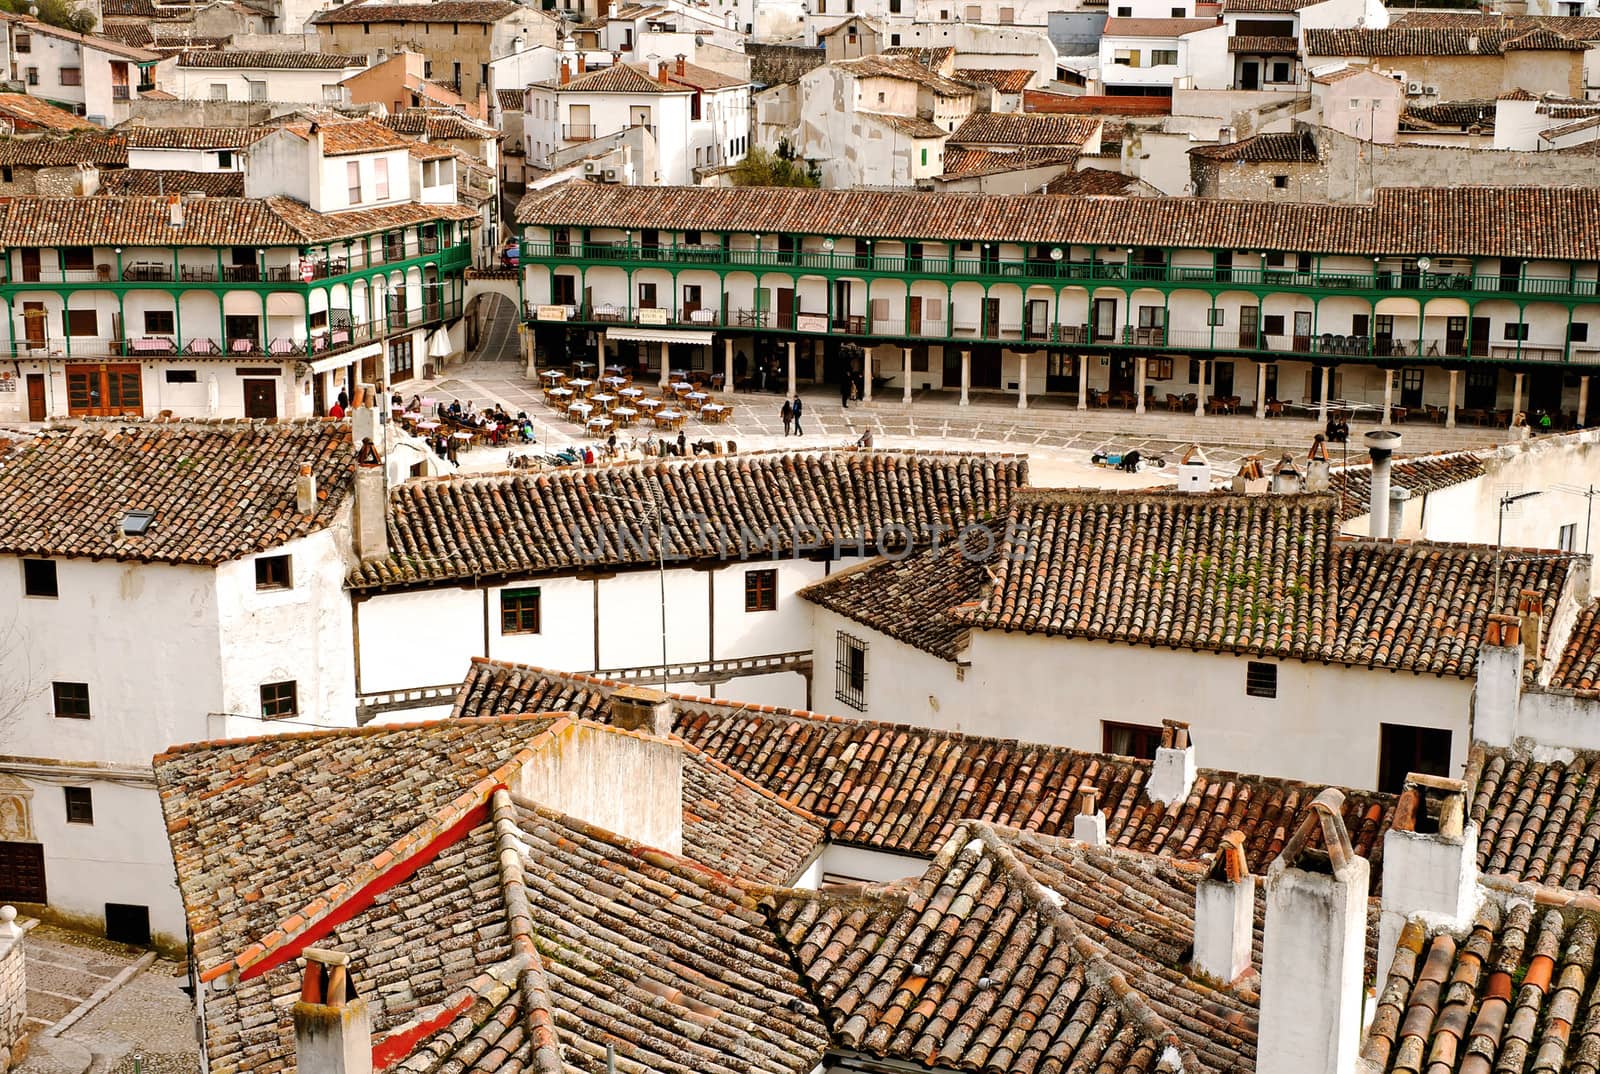 View on "Plaza Mayor" of historic small town Chinchon near Madrid 